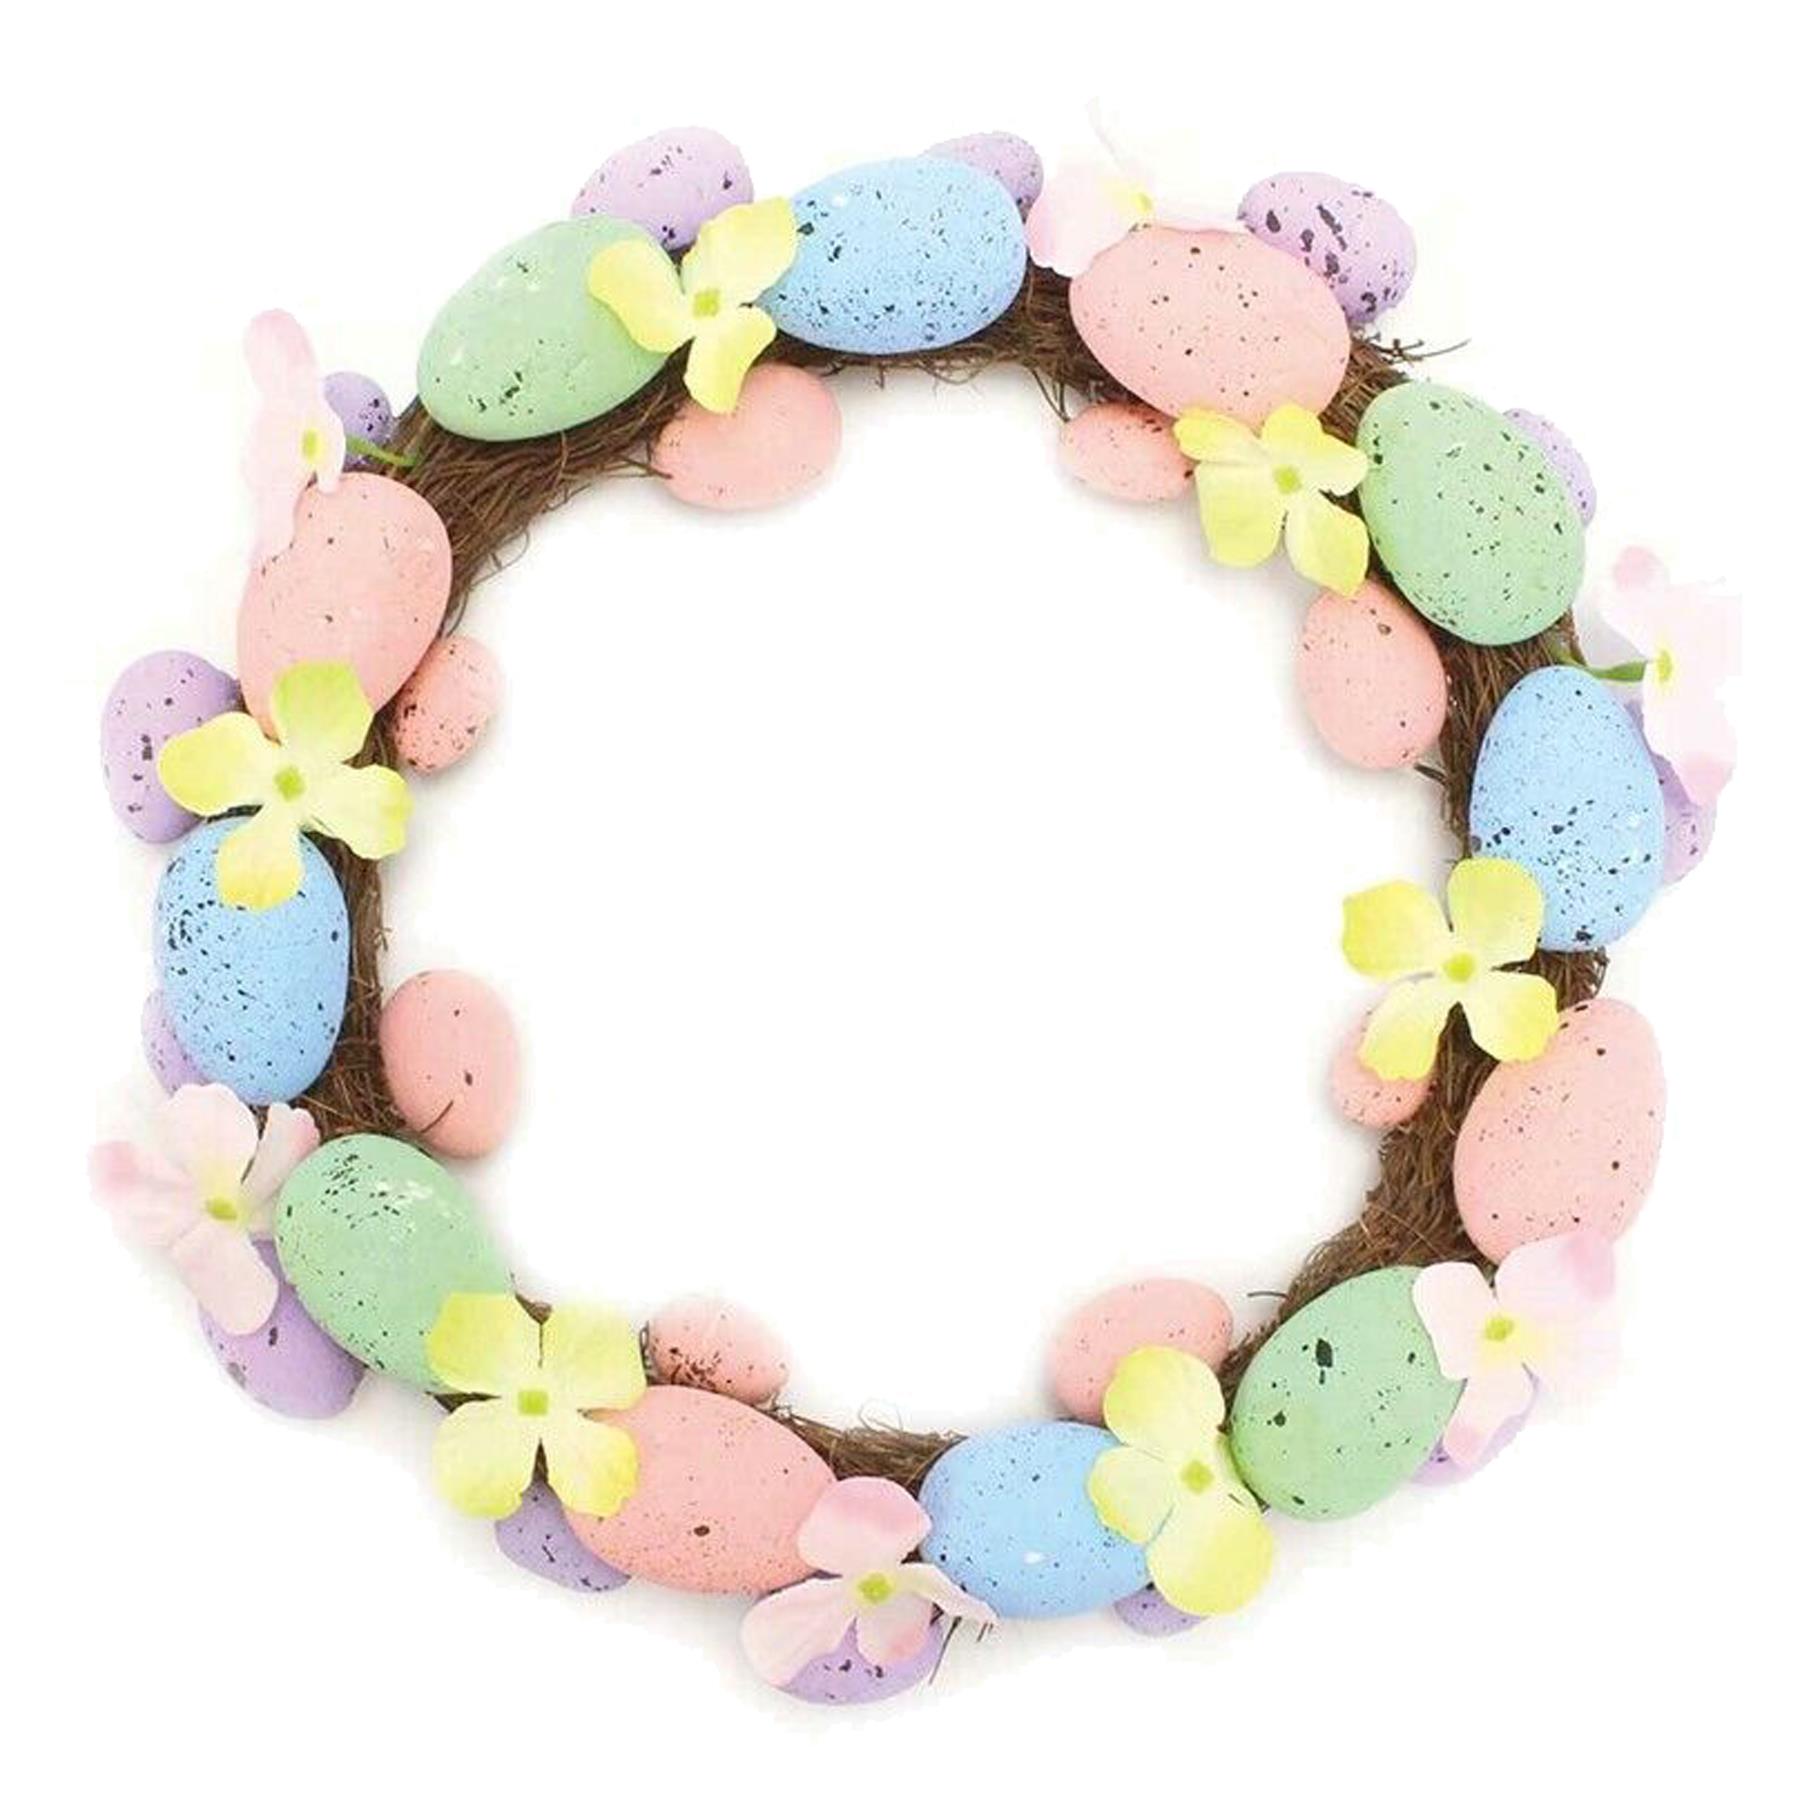 Easter Art Deco Decorations, Room Ornament - Round Wreath with Eggs / Flowers